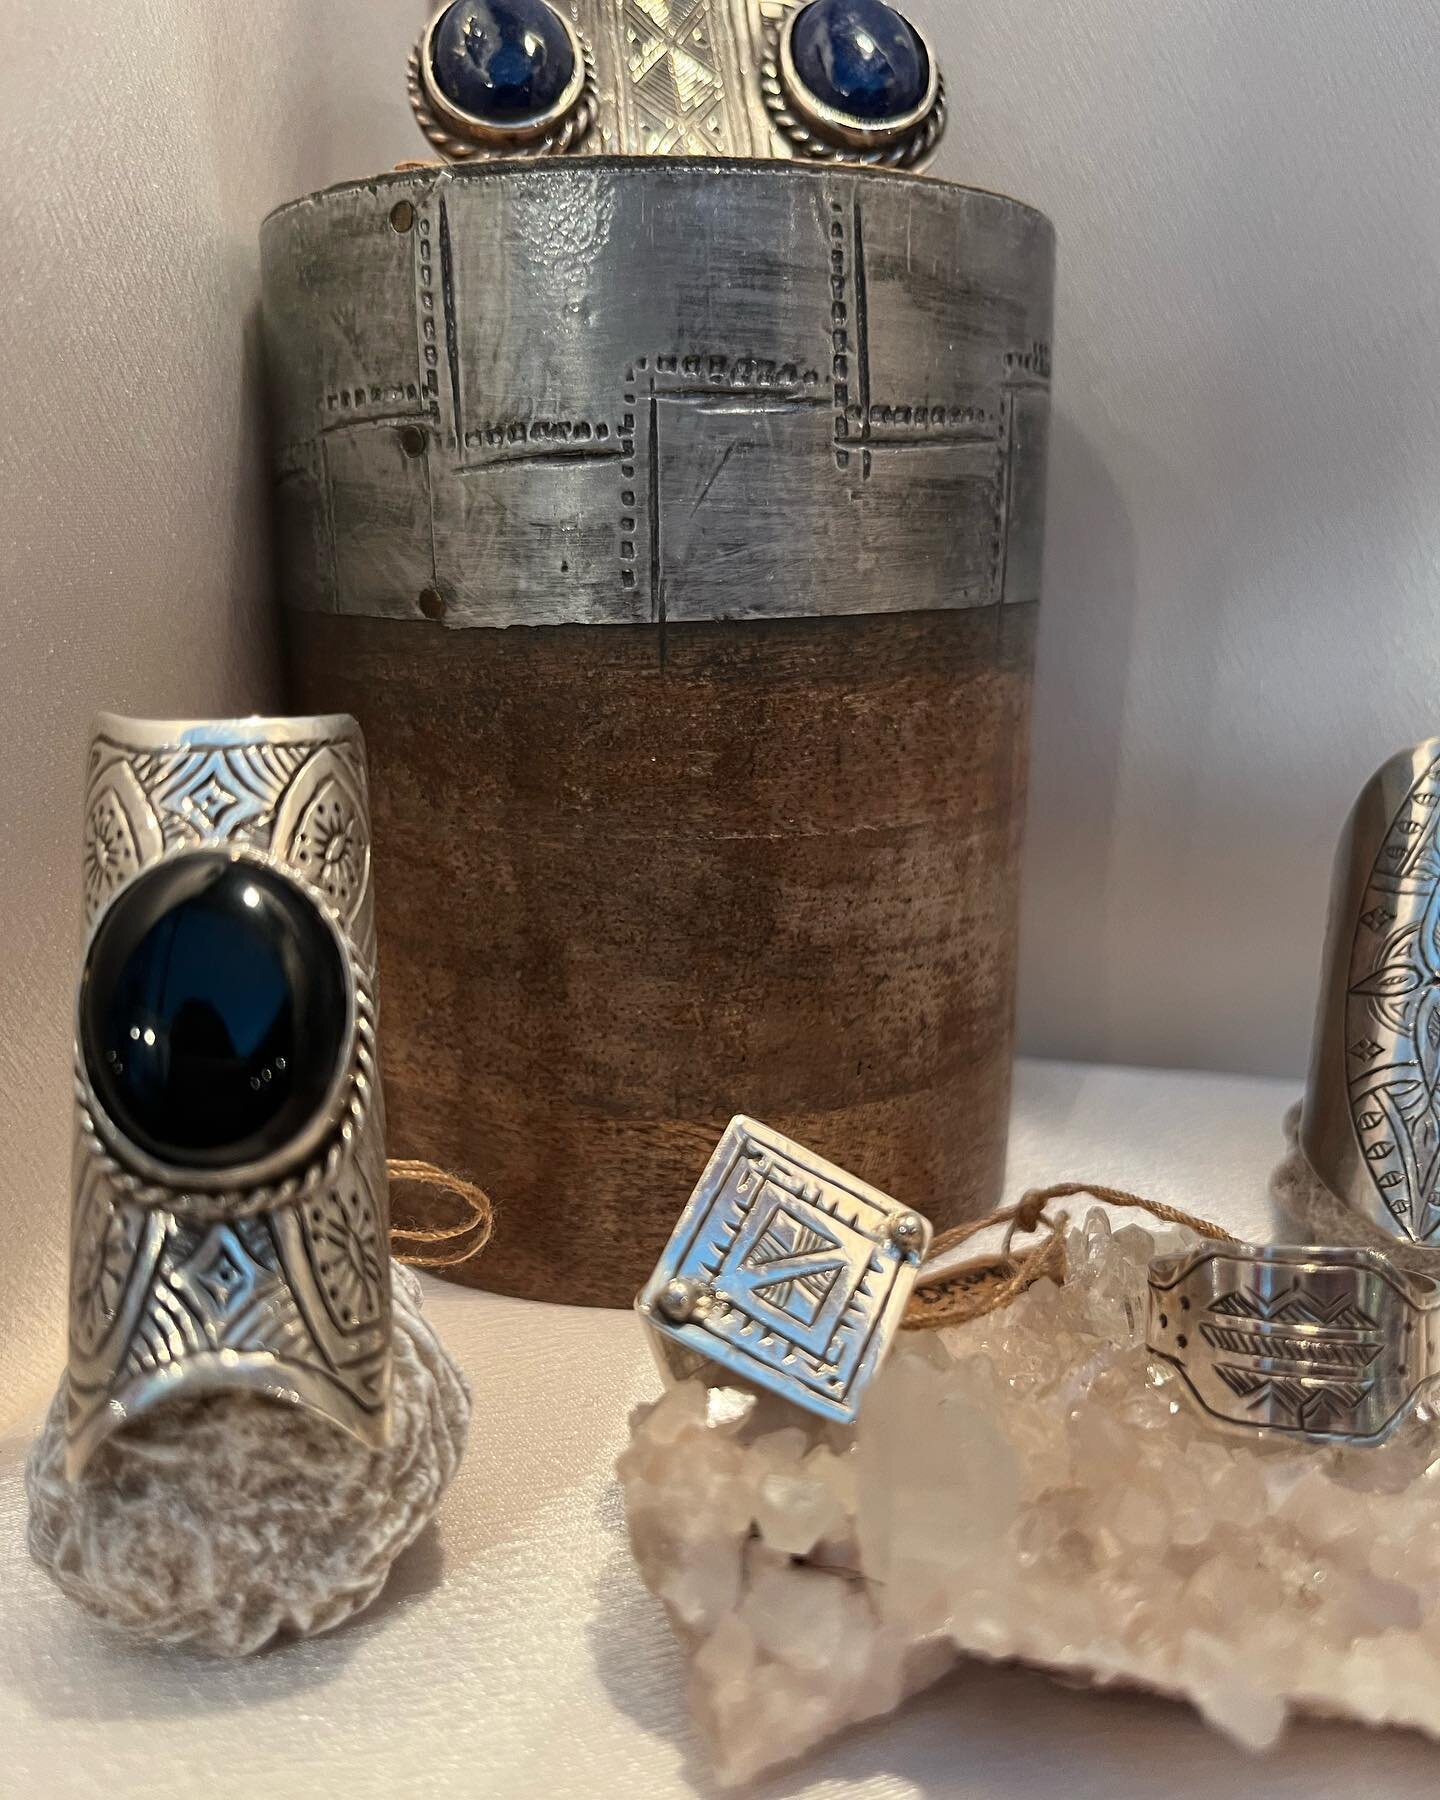 New Vendor Alert! 
We are so excited about this beautiful display of jewelry by @nomadicpriestess 

Welcome to Kress, Page!